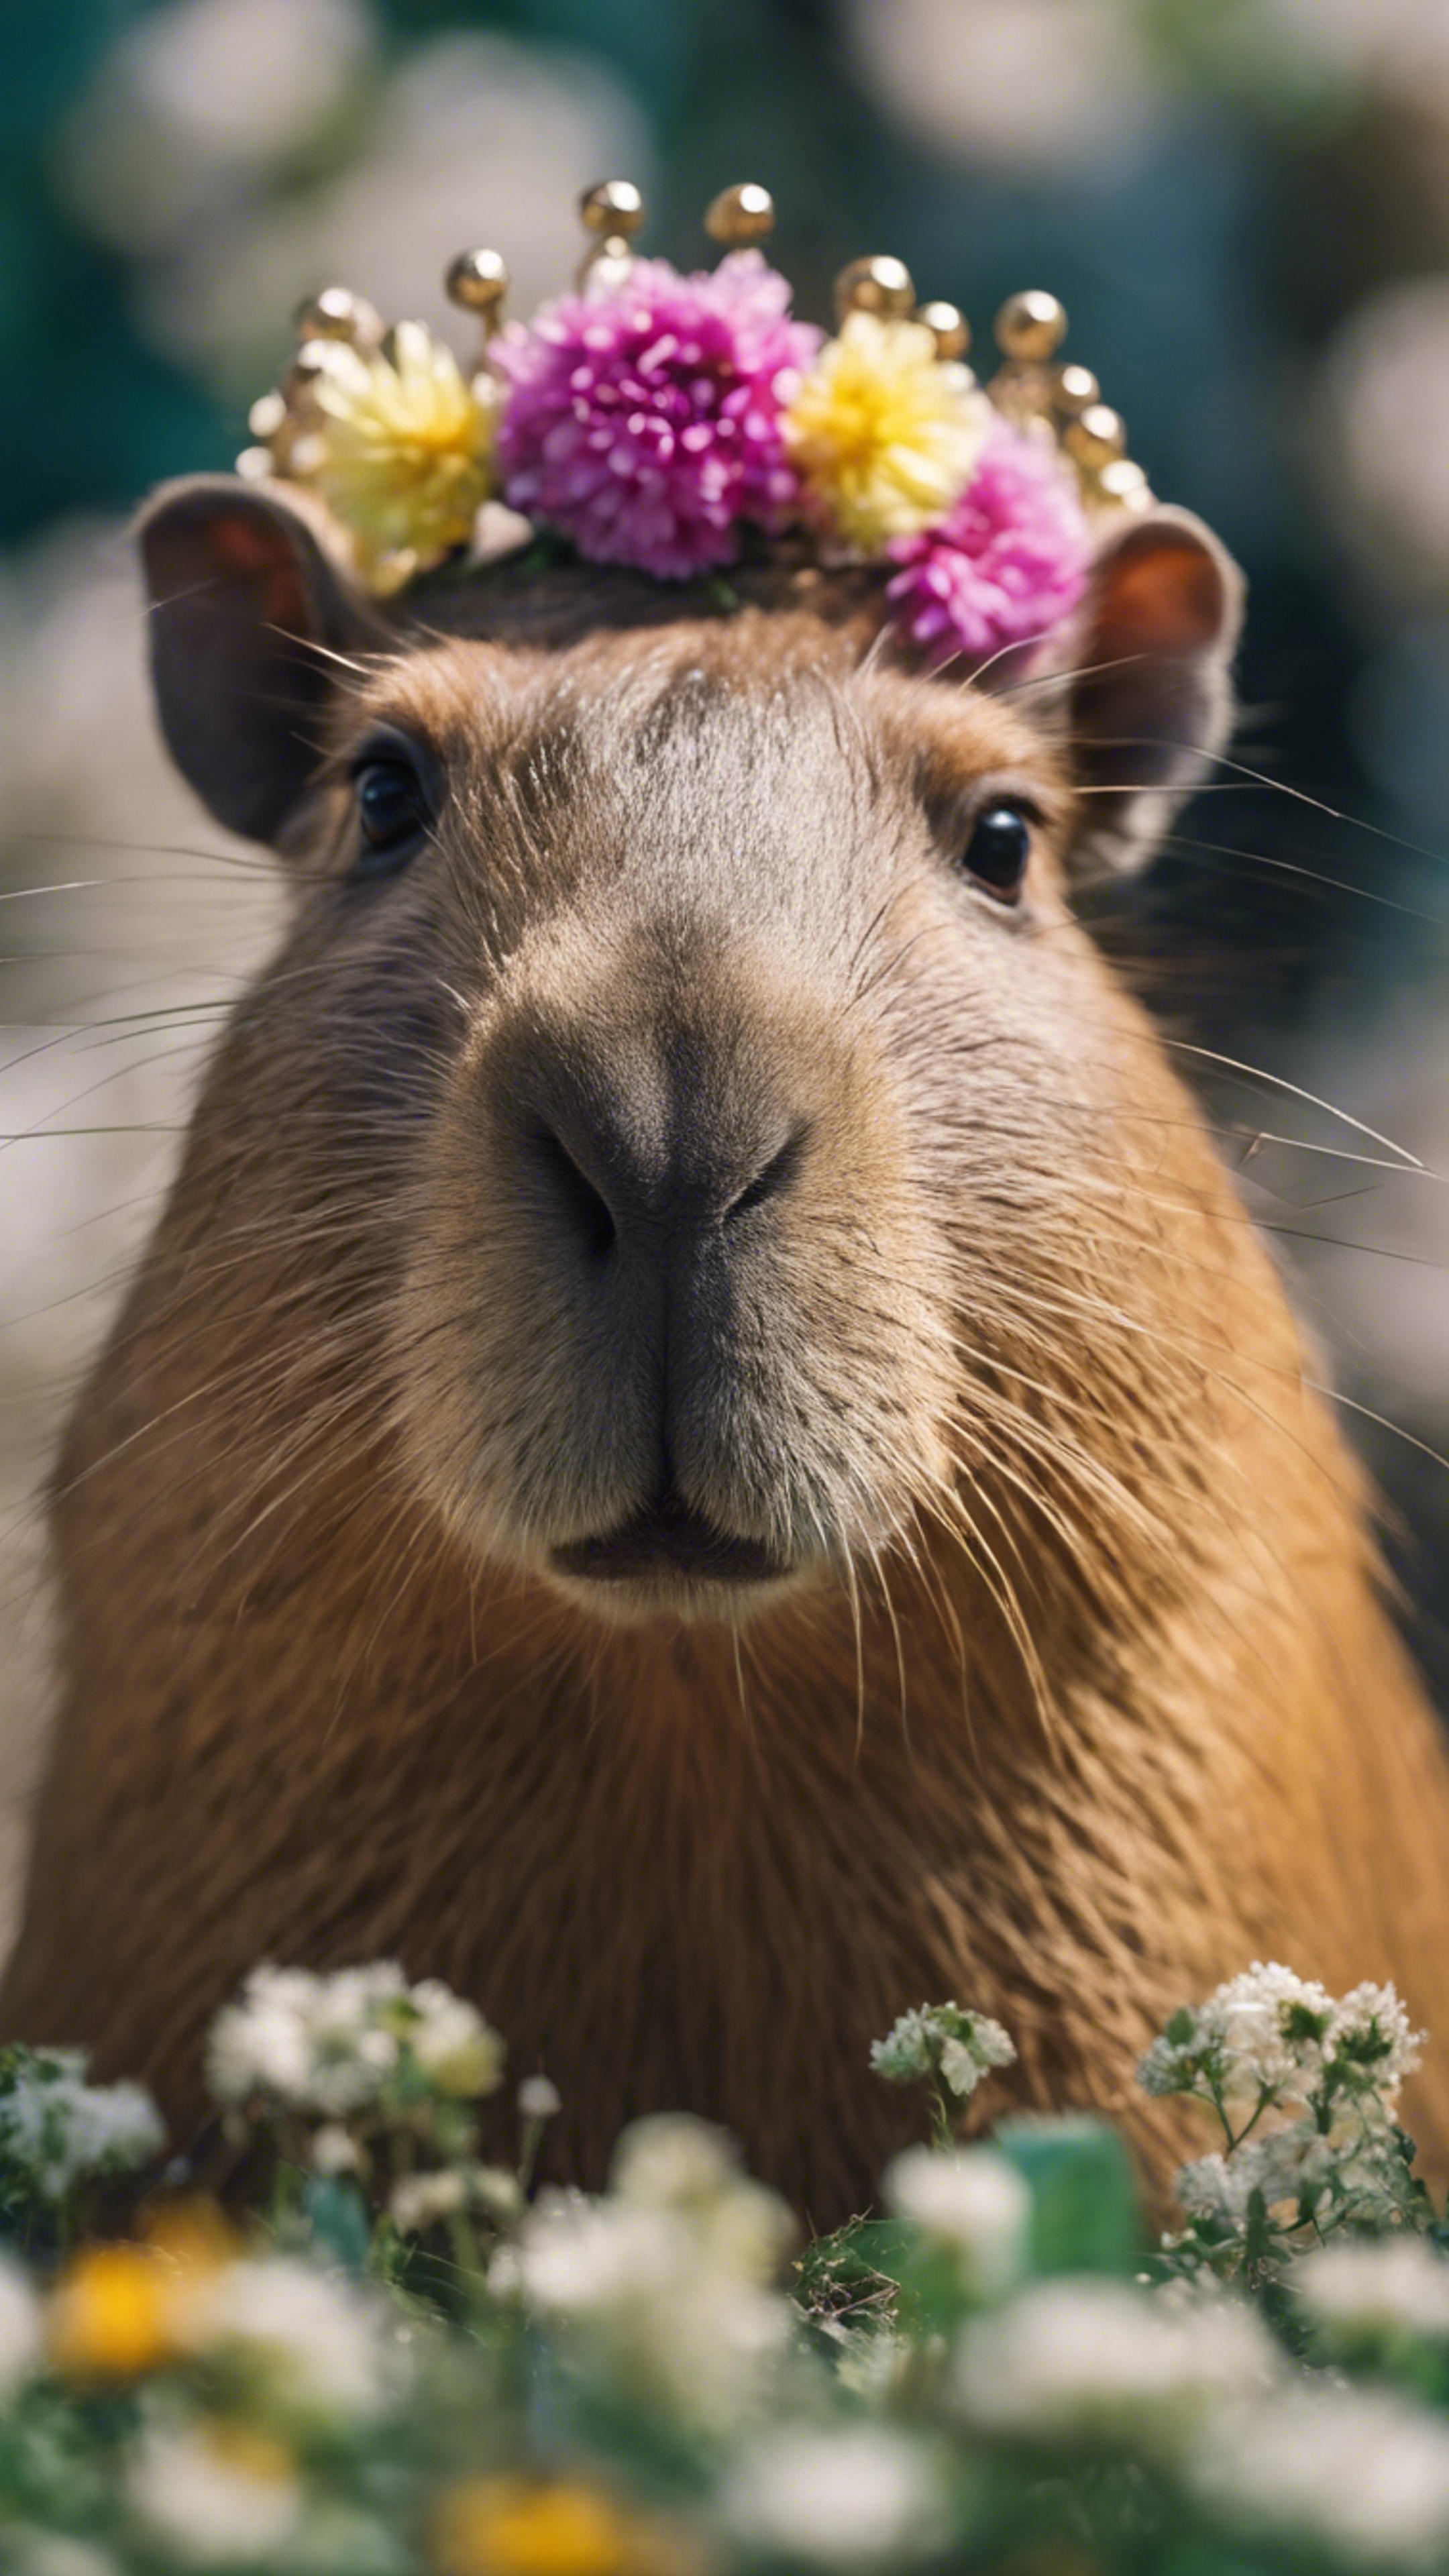 A capybara with a crown of flowers around its head, looking straight at the camera.壁紙[0d44b907426642798d22]